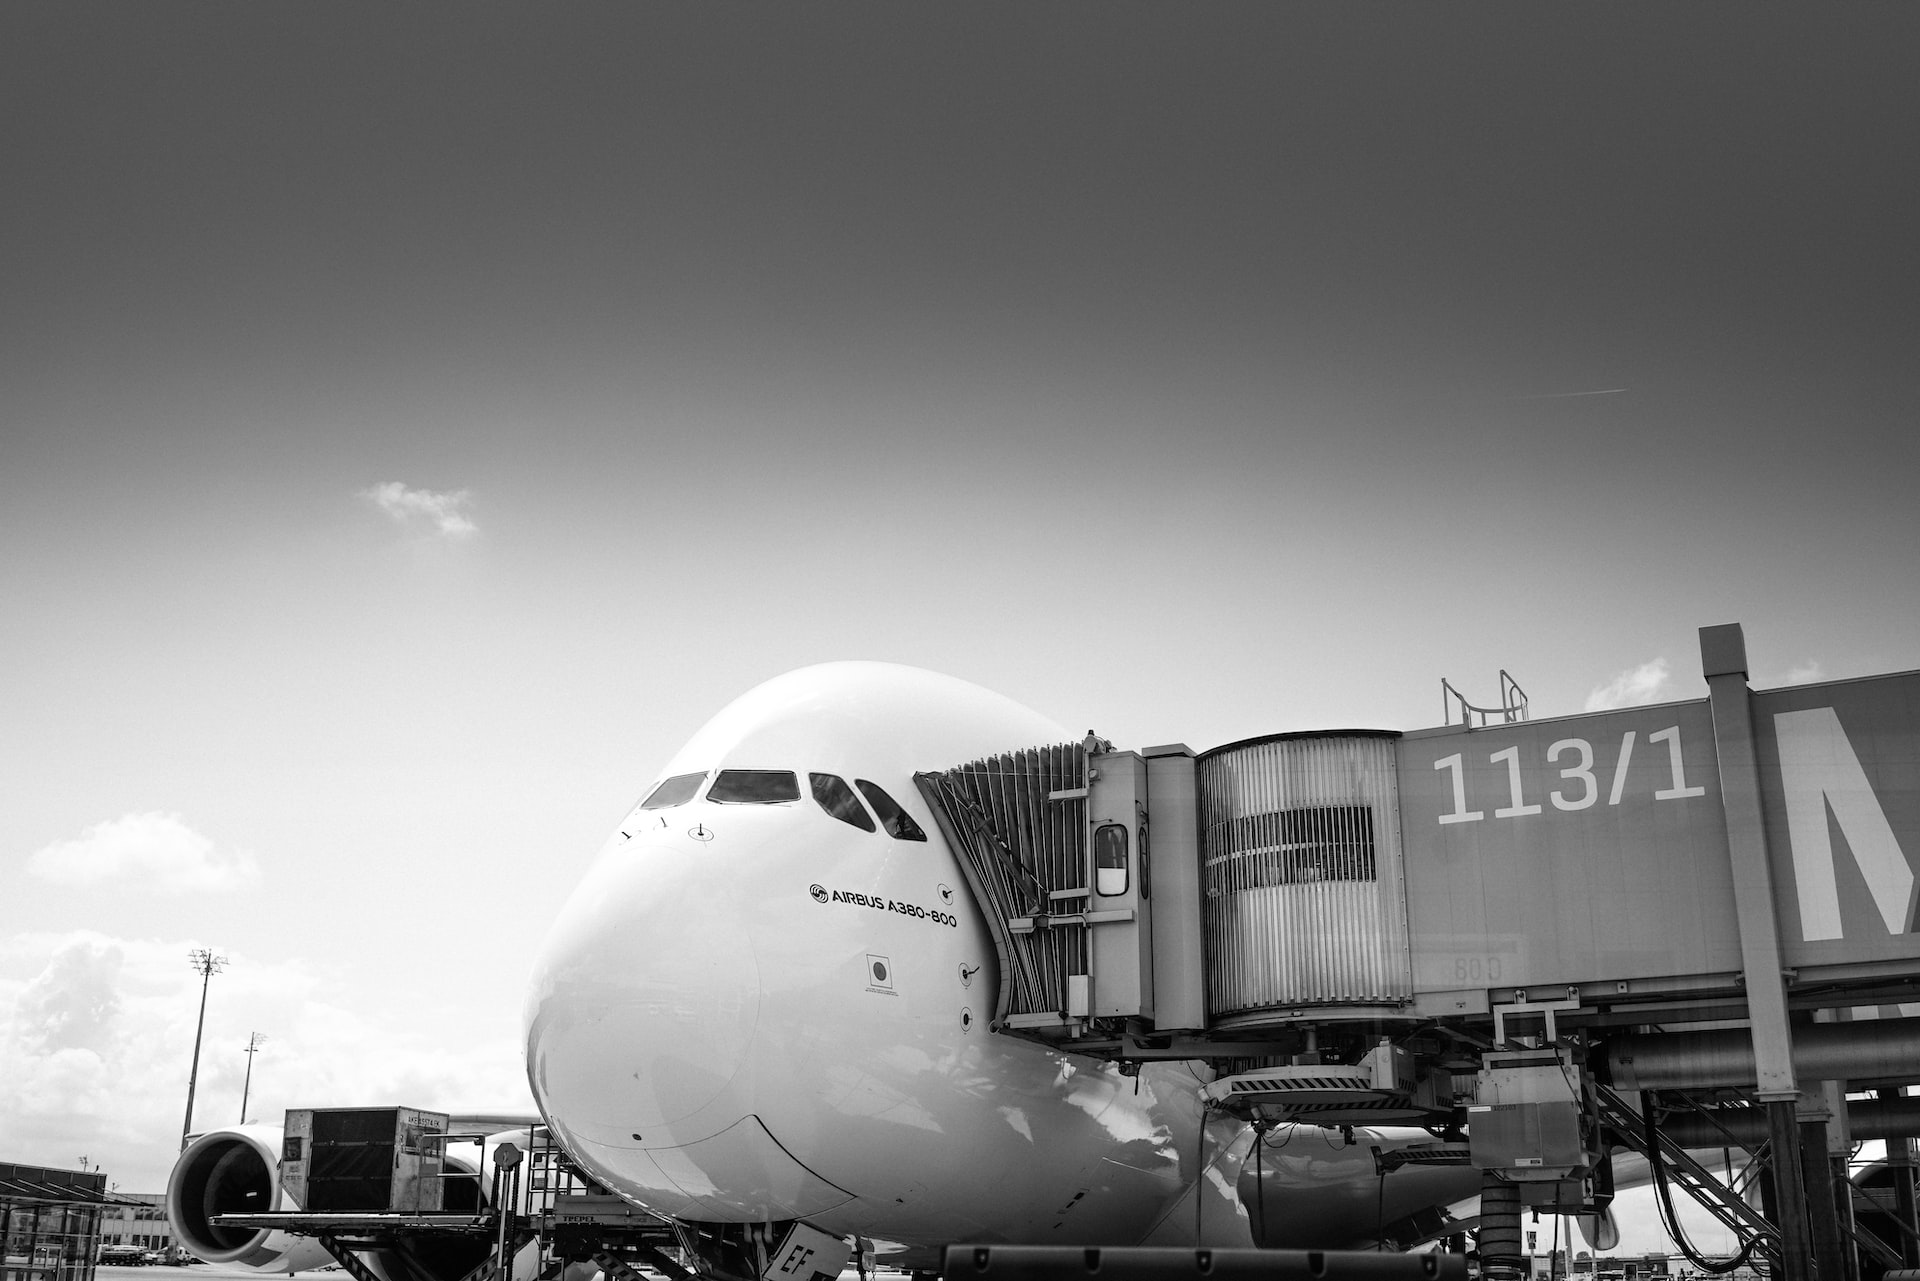 An Airbus A380 at a jetway waiting for passengers to board.